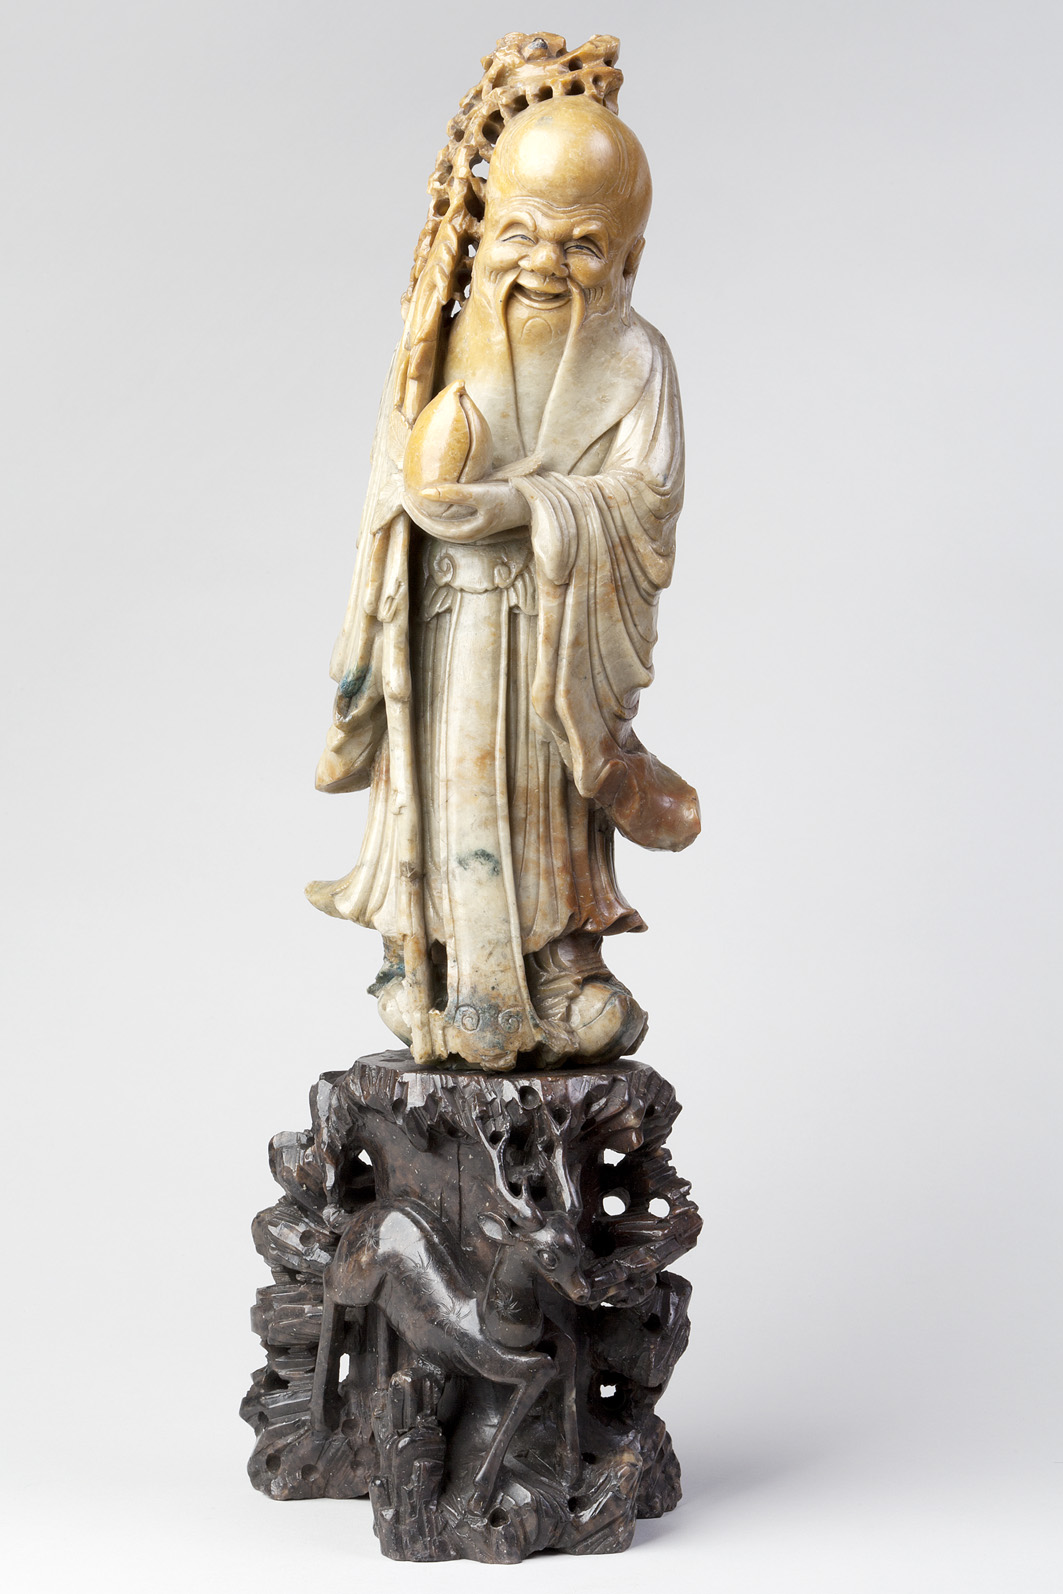 Chinese Figure of Shou-Lao Holding a Peach. Qing Dynasty, 19th Century. James Cromar Watt bequest, 1941. © Aberdeen City Council (Art Gallery and Museums Collections)